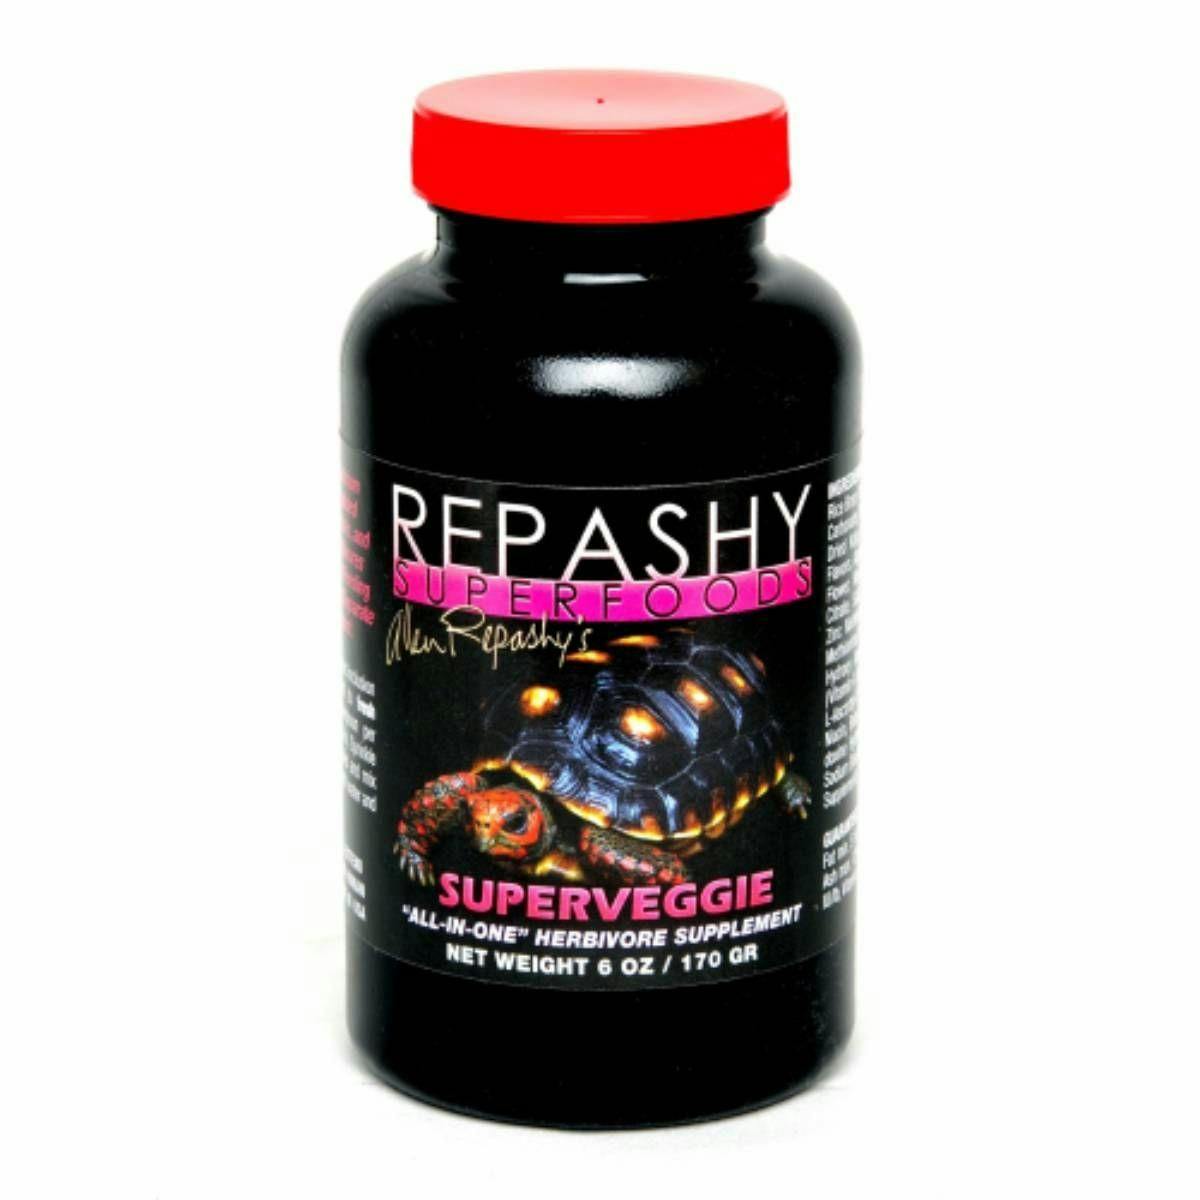 Image for Repashy SuperVeggie (6 oz) by Josh's Frogs